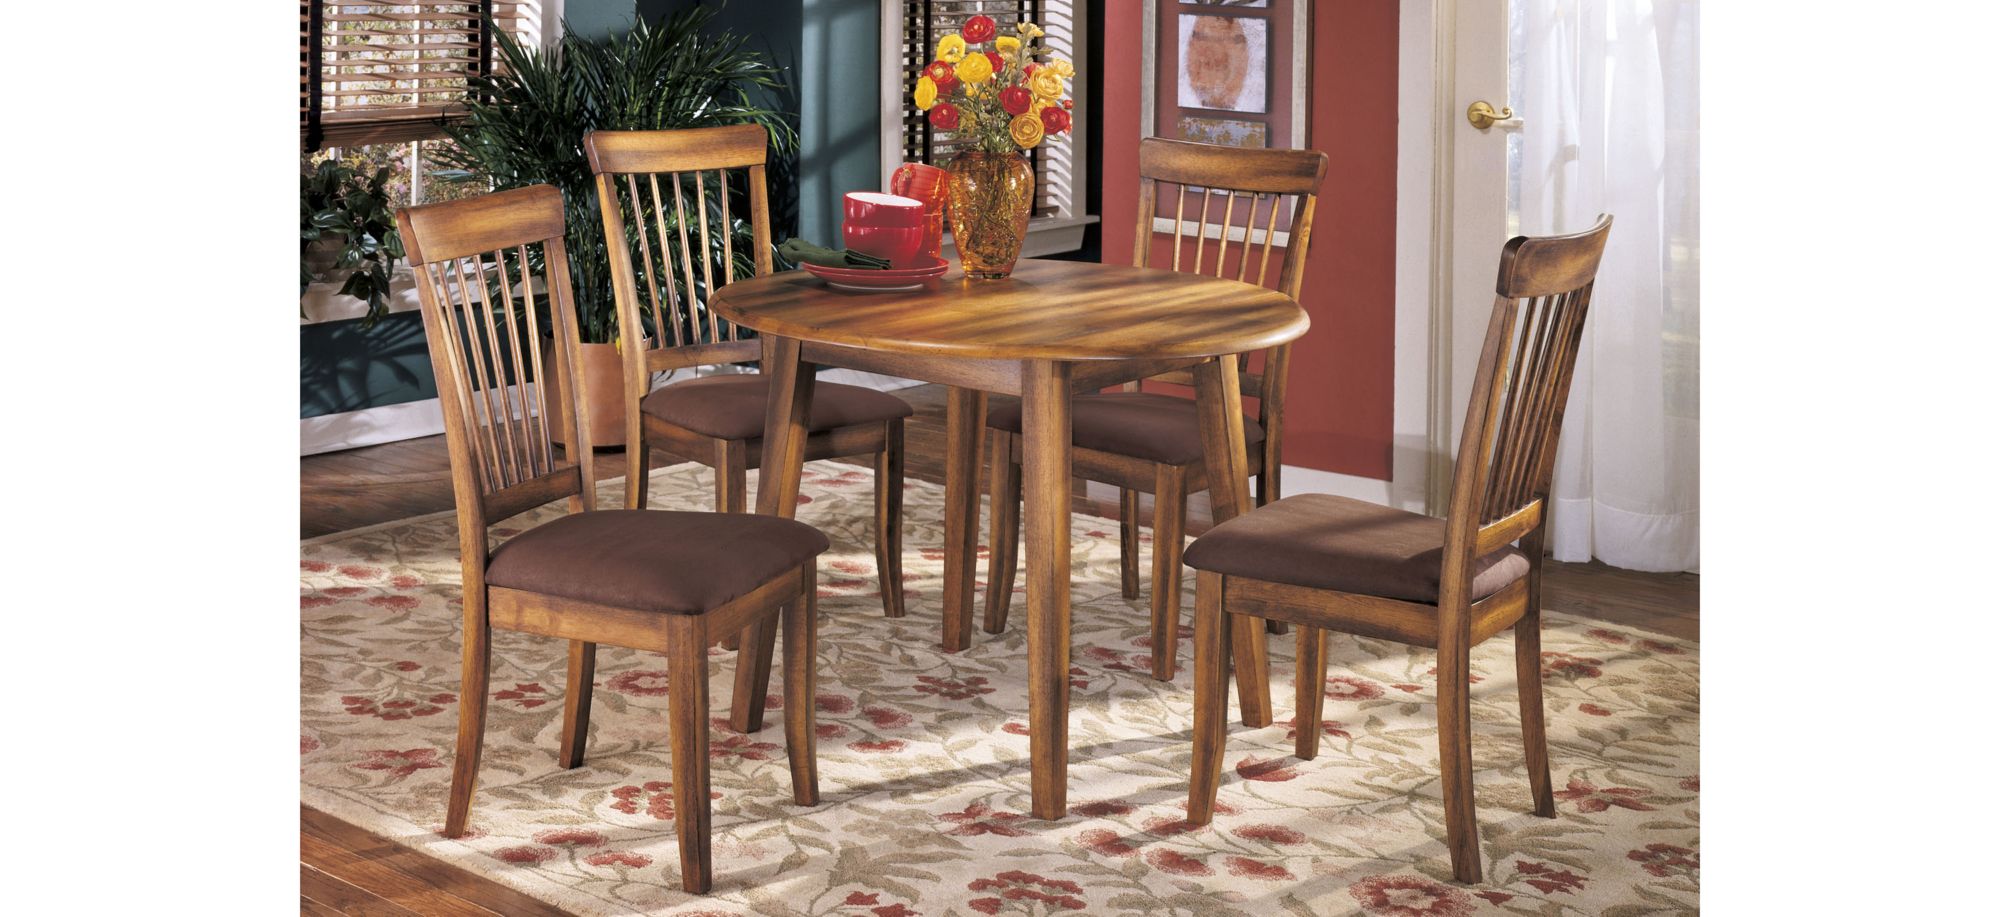 Berringer 5-pc. Dining Set in Rustic Brown by Ashley Furniture